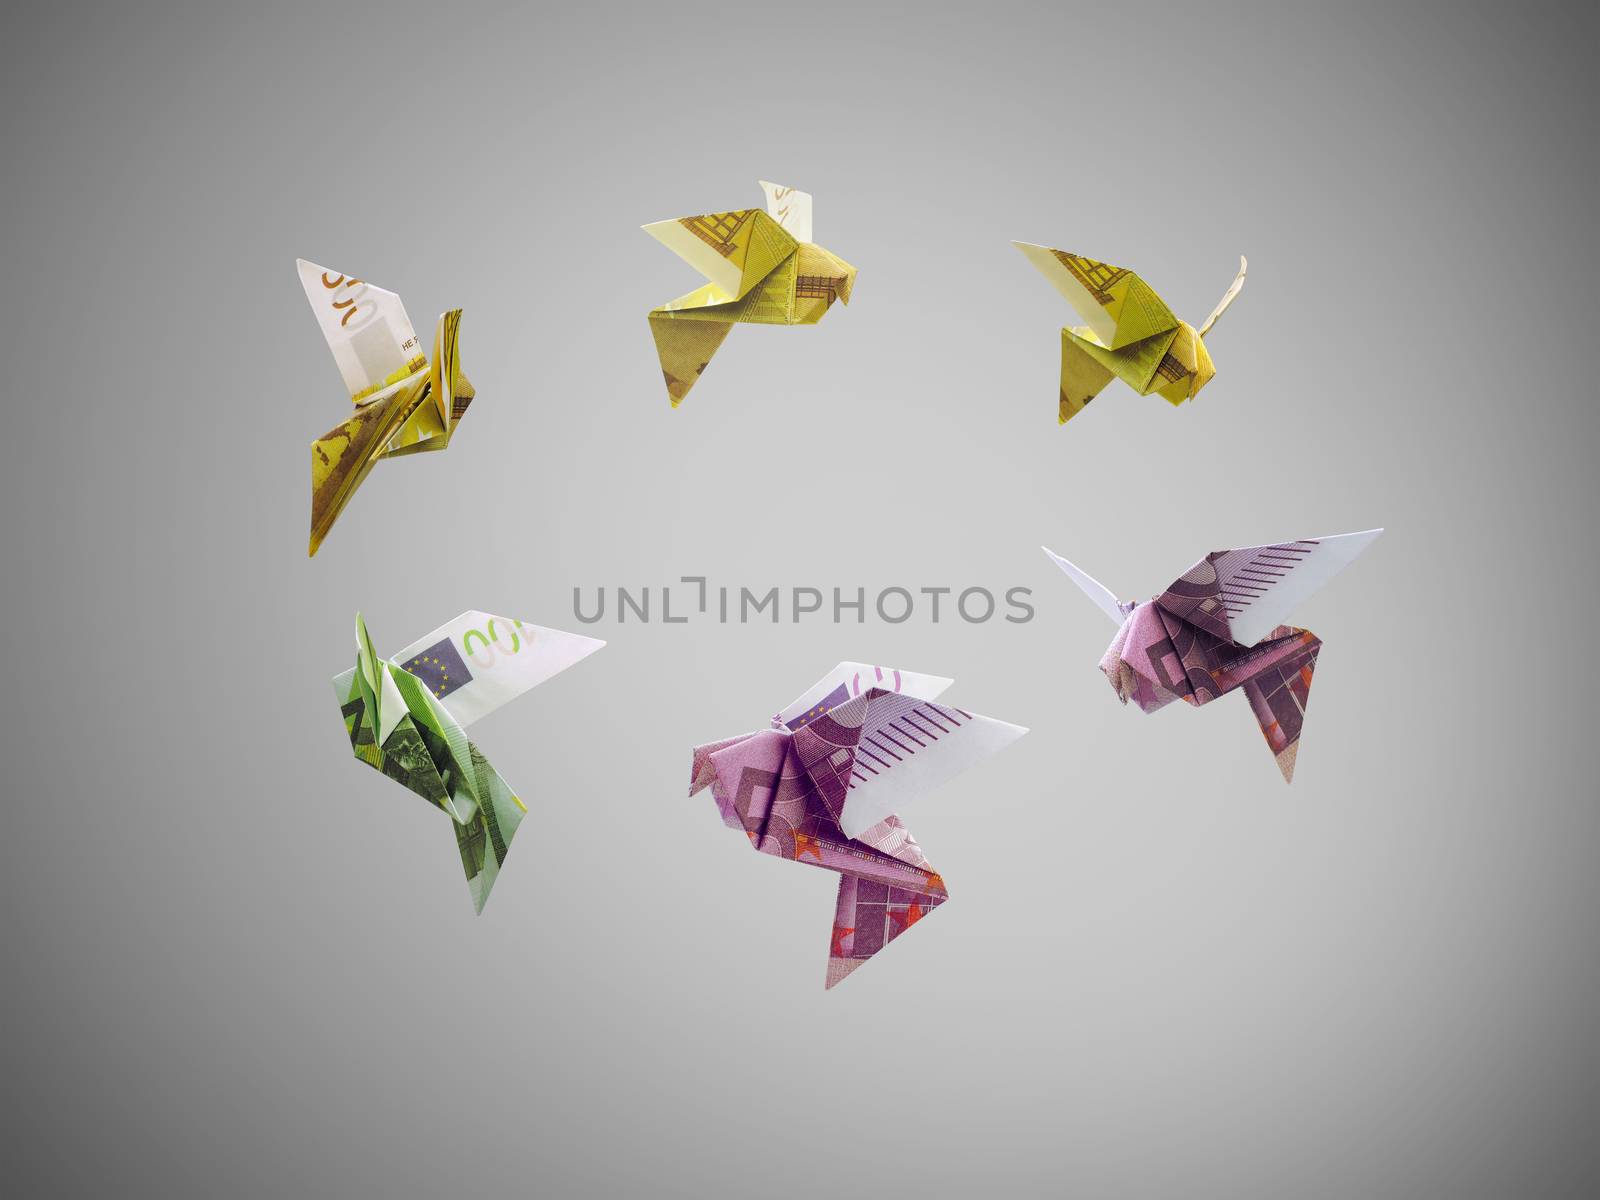 origami birds of euro money fly out